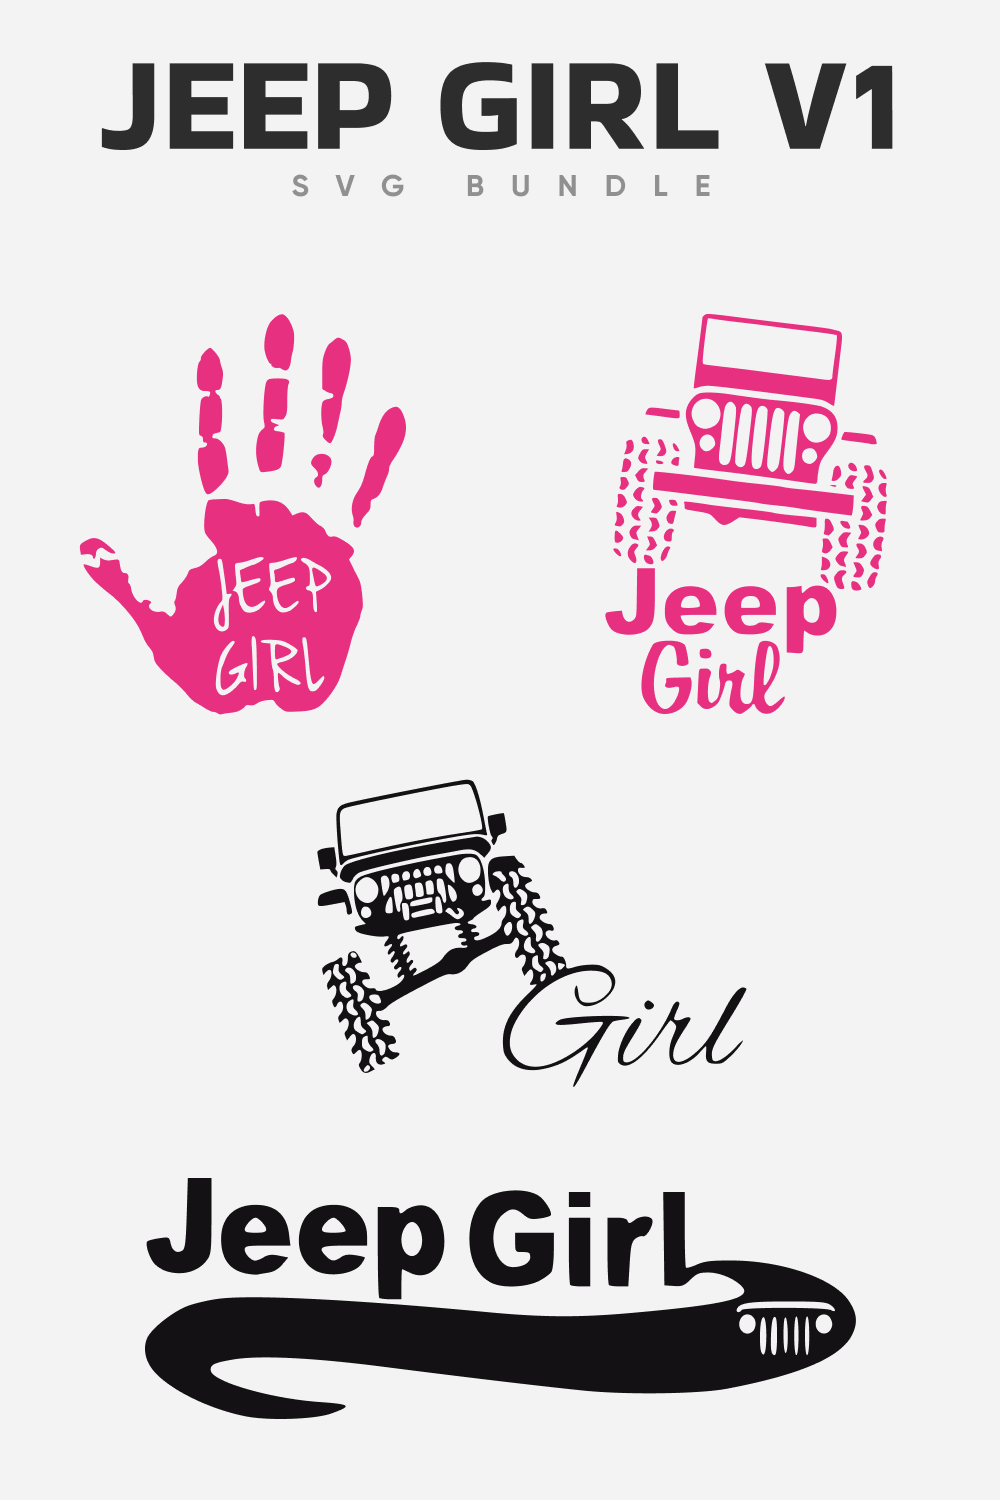 Girl's Jeep in Black and Pink Color.